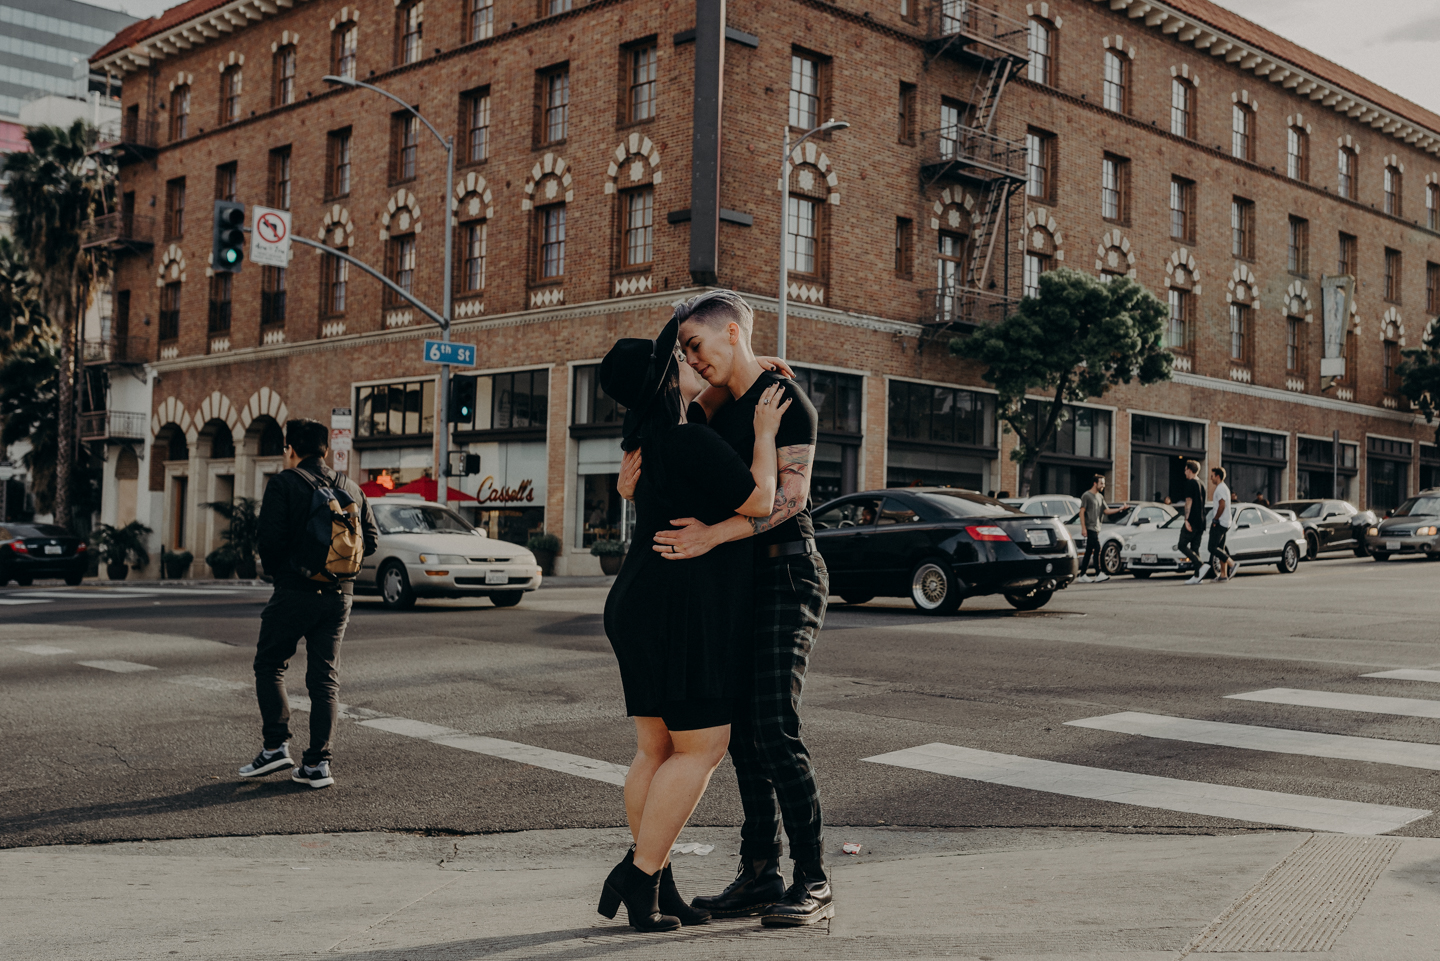 queer wedding photographer in los angeles - lesbian engagement session los angeles - isaiahandtaylor.com-010.jpg